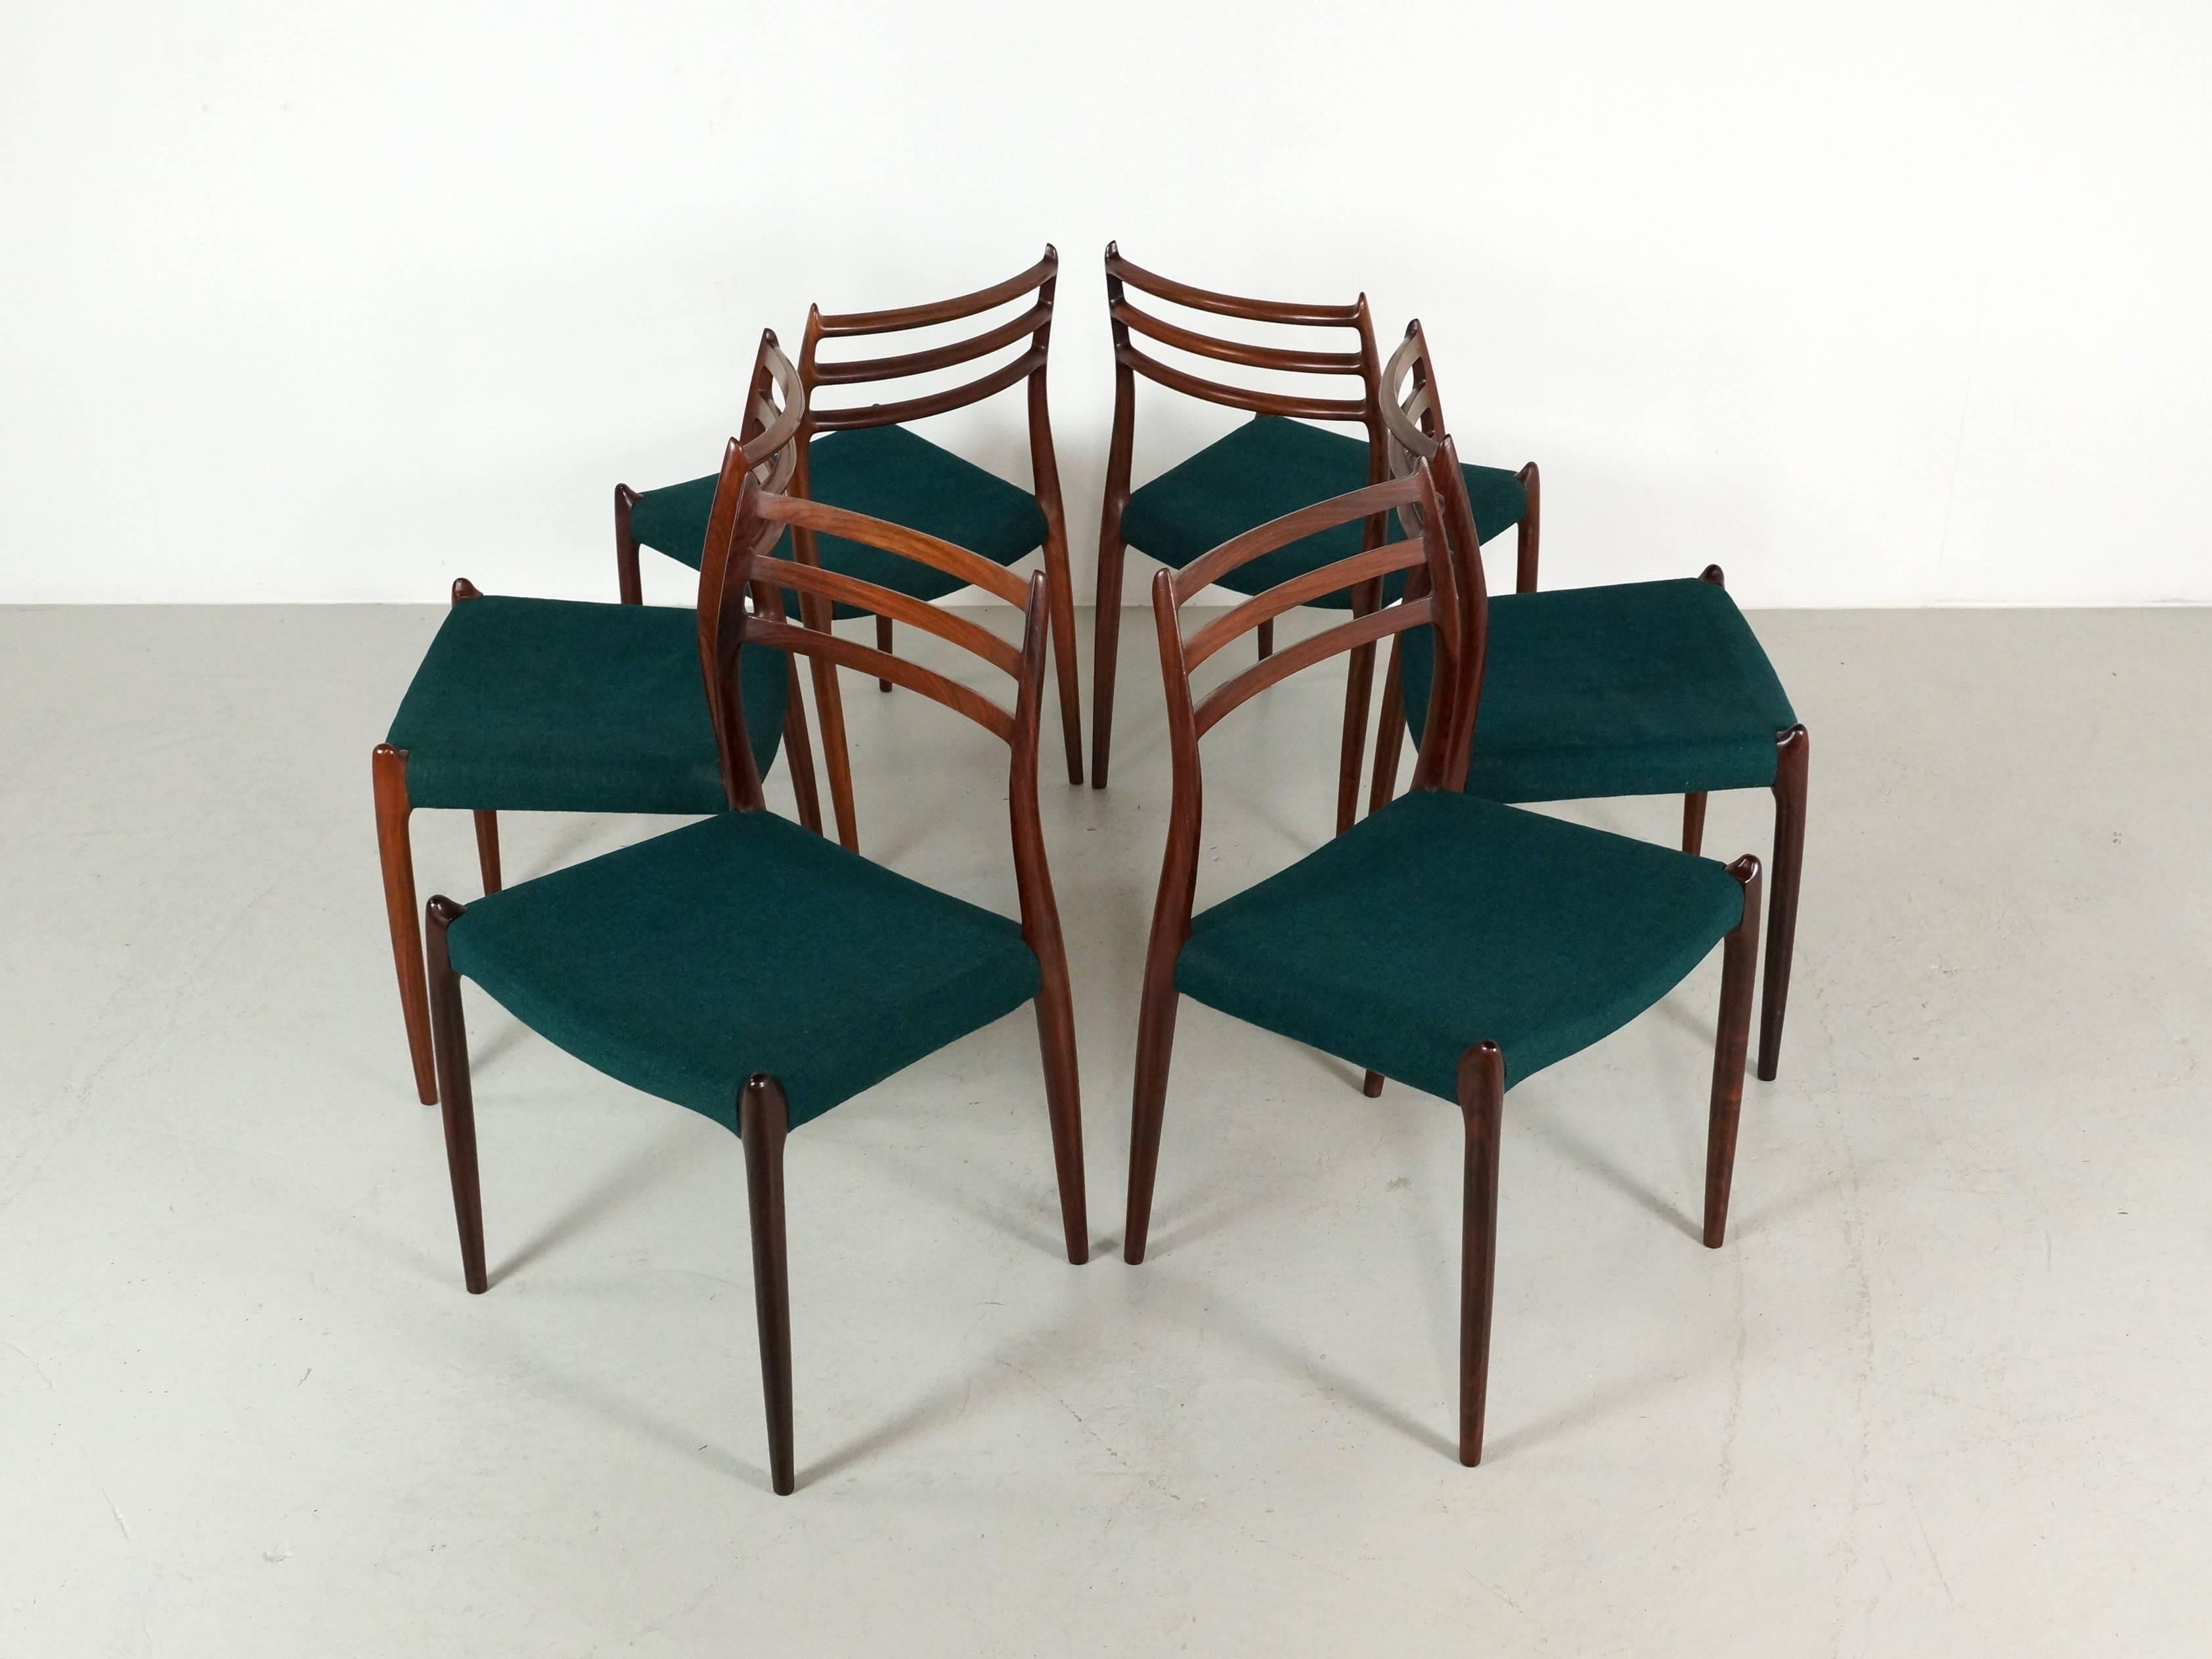 Great set of six rosewood Møller chairs designed by Niels Otto Moller for J.L. Møller. The chairs have their original reupholster with green fabric and are in very good condition. Beautiful set and on request there is also a rectangular or round